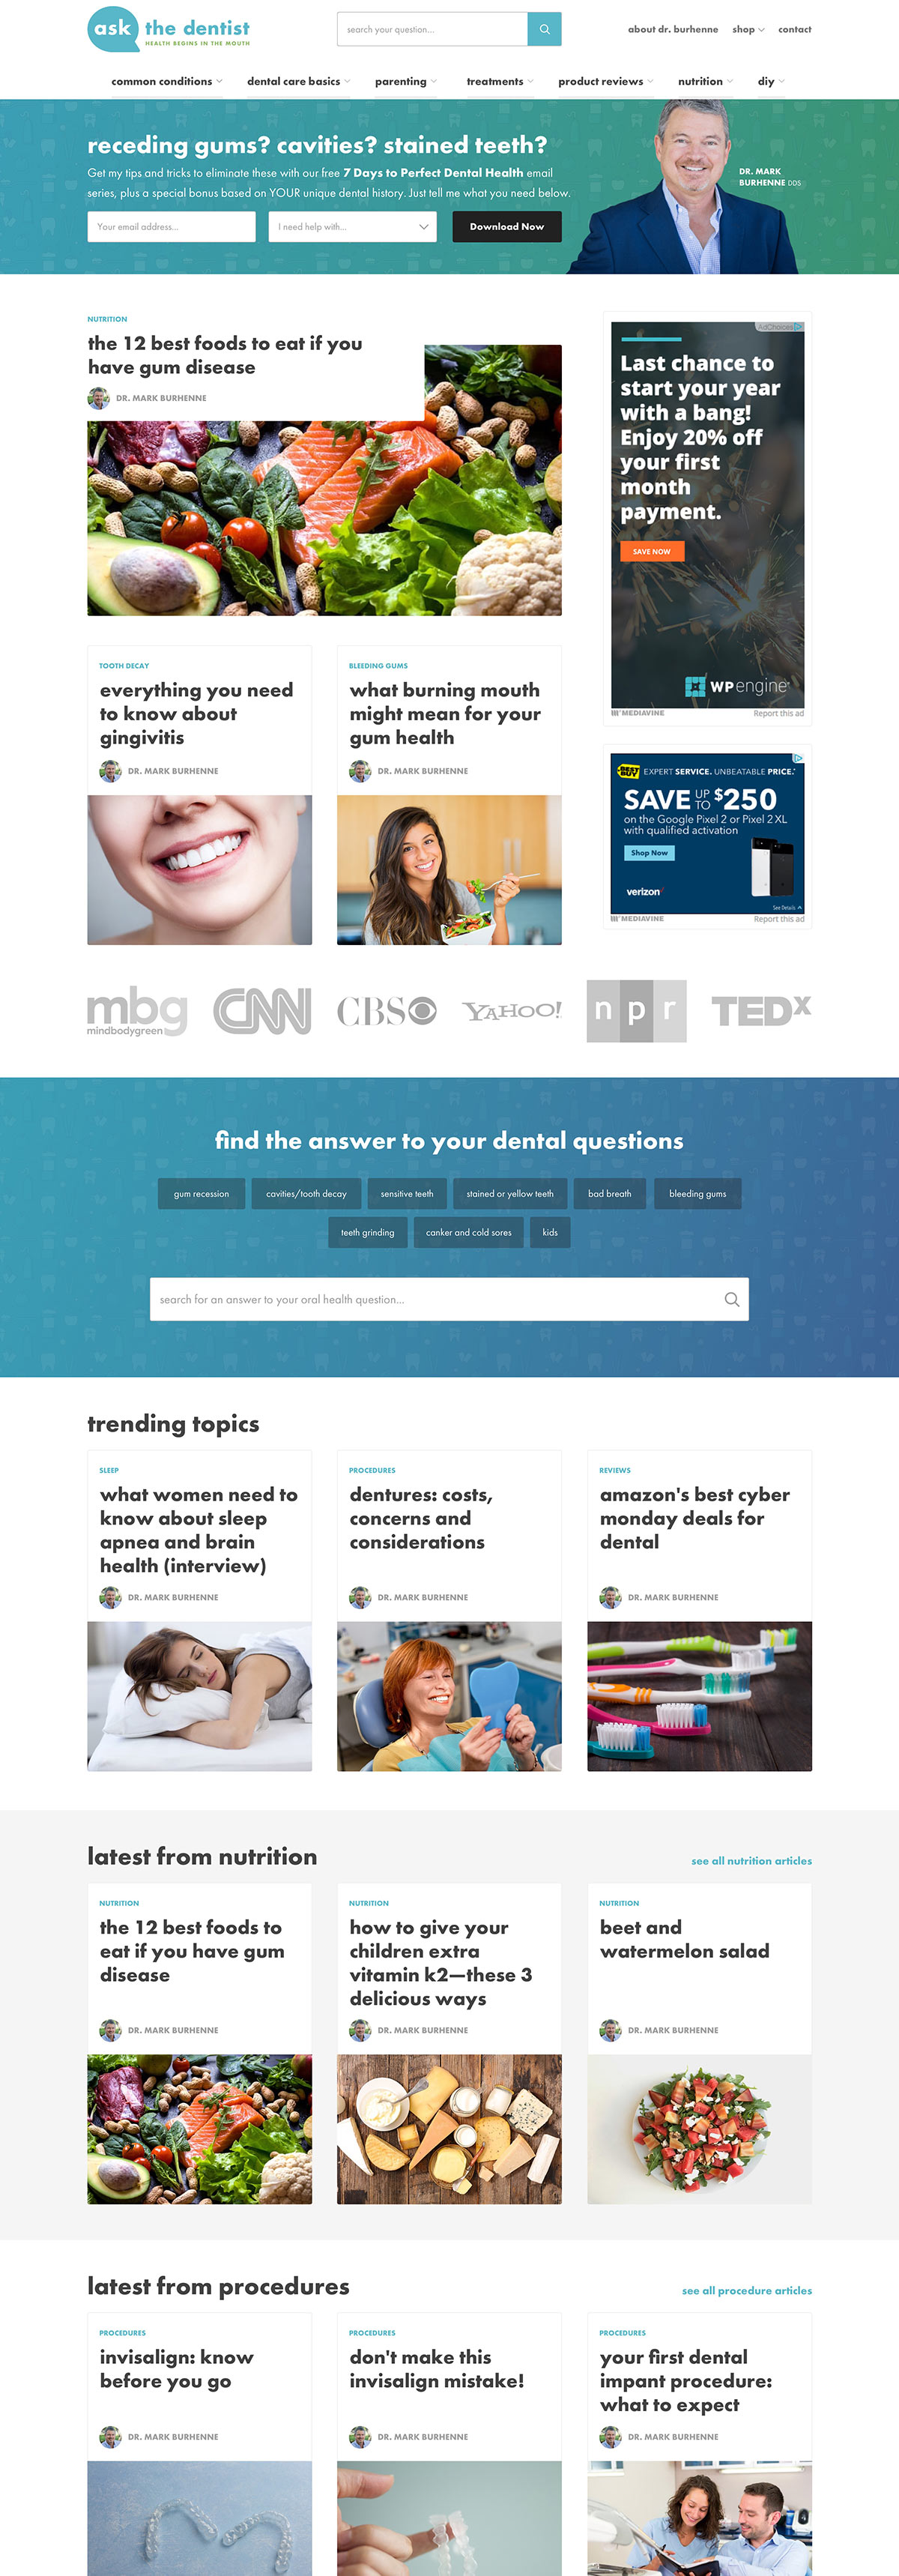 Ask the Dentist homepage